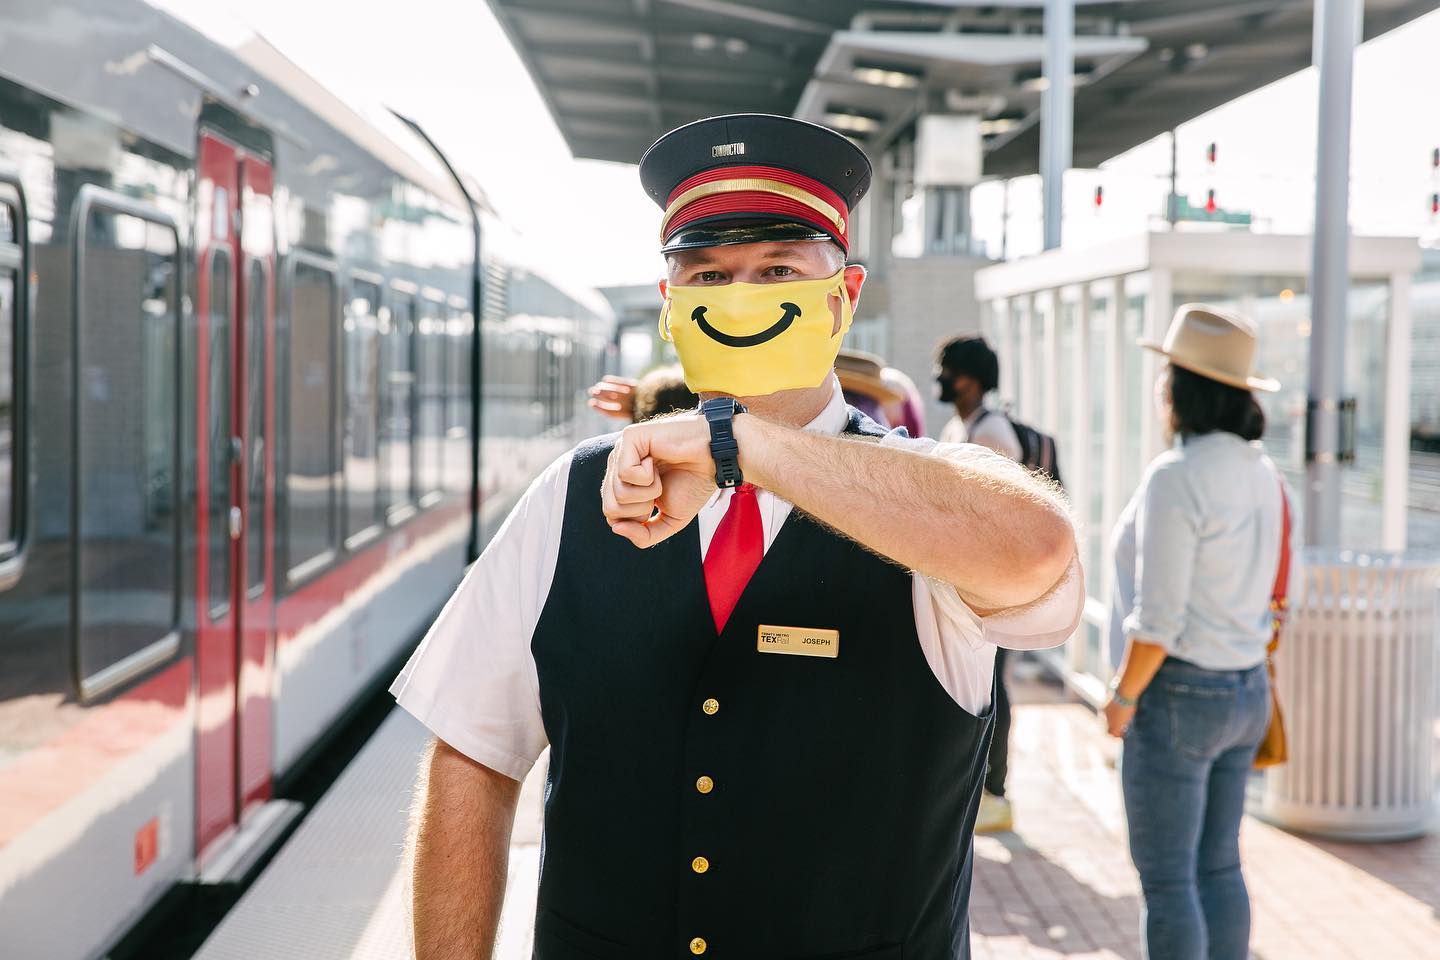 Smile. And be on time.

————

Filmed with JO Agency for Trinity Metro. 

Photo with the big bearded Ben Bender. 

#trains #videoproductioncompany #brand #metro #transportation #redcamera #trinitymetrotexrail #texrail #fortworthtexas #videographer #commercials #advertisingphotography #advertisingvideo #storytellers